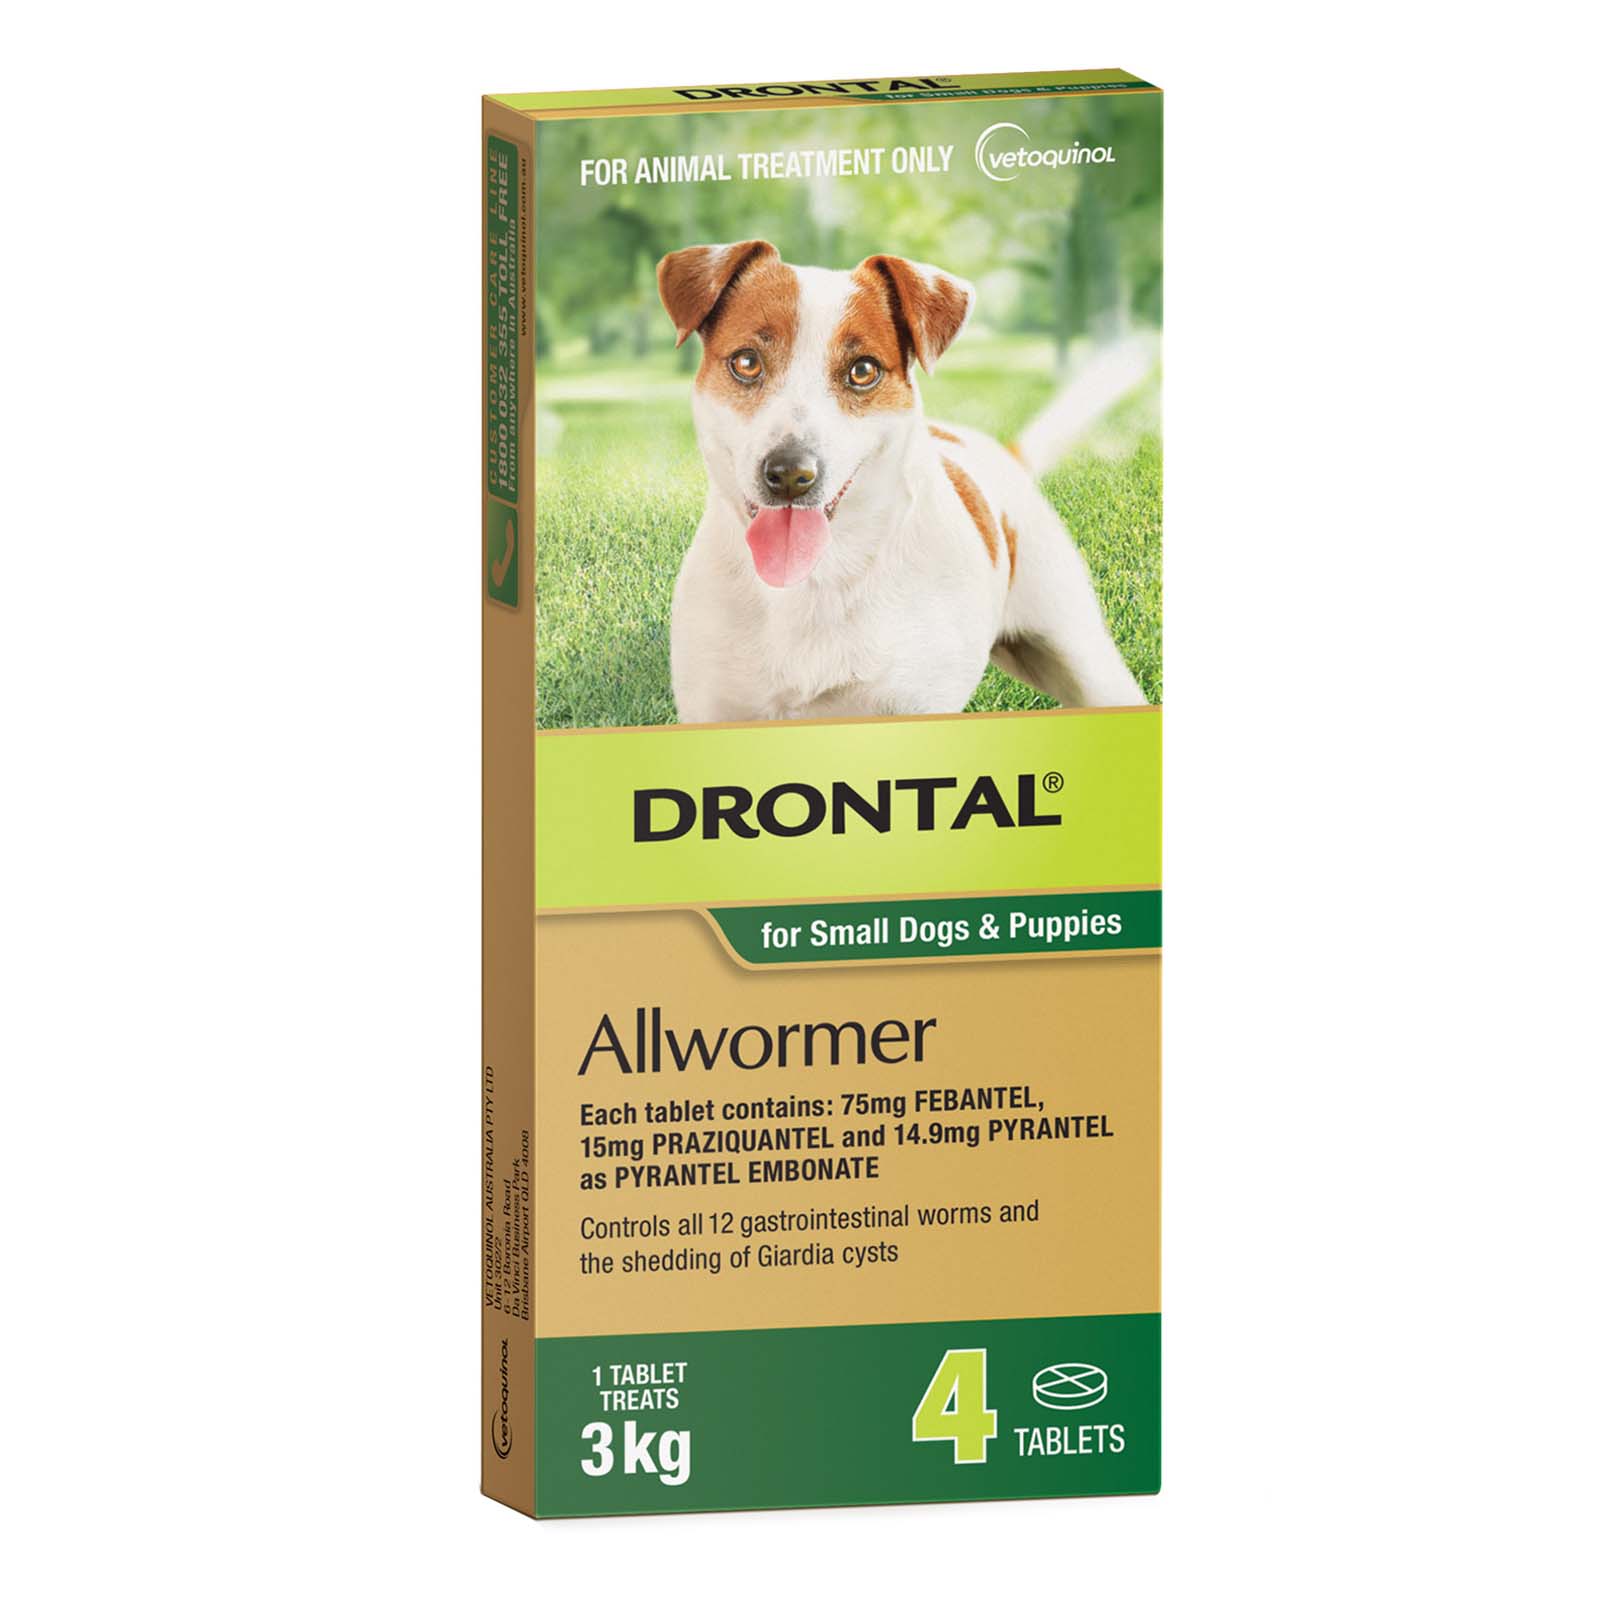 Drontal Allwormer Dogs 3kg x 4 Tablets